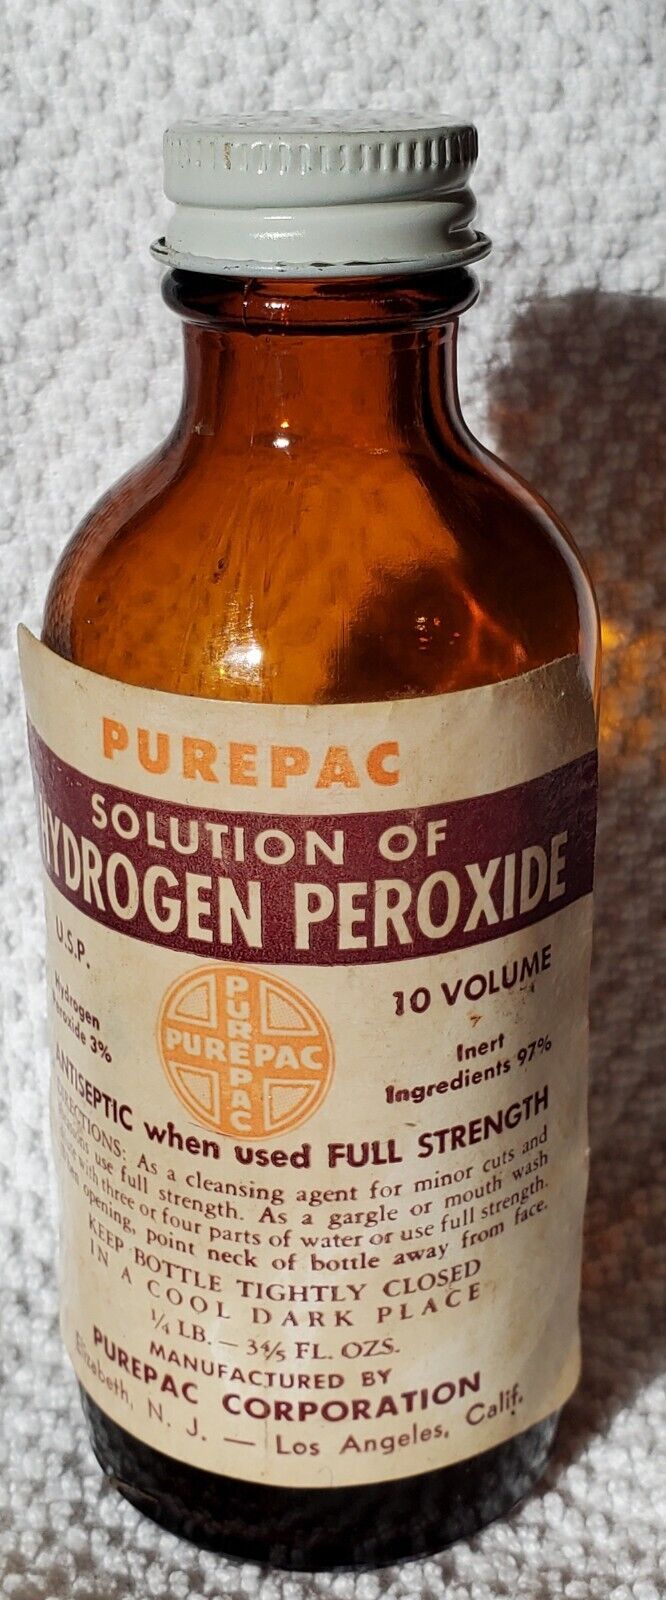 Vintage Purepac Hydrogen Peroxide Amber Glass Bottle With Contents